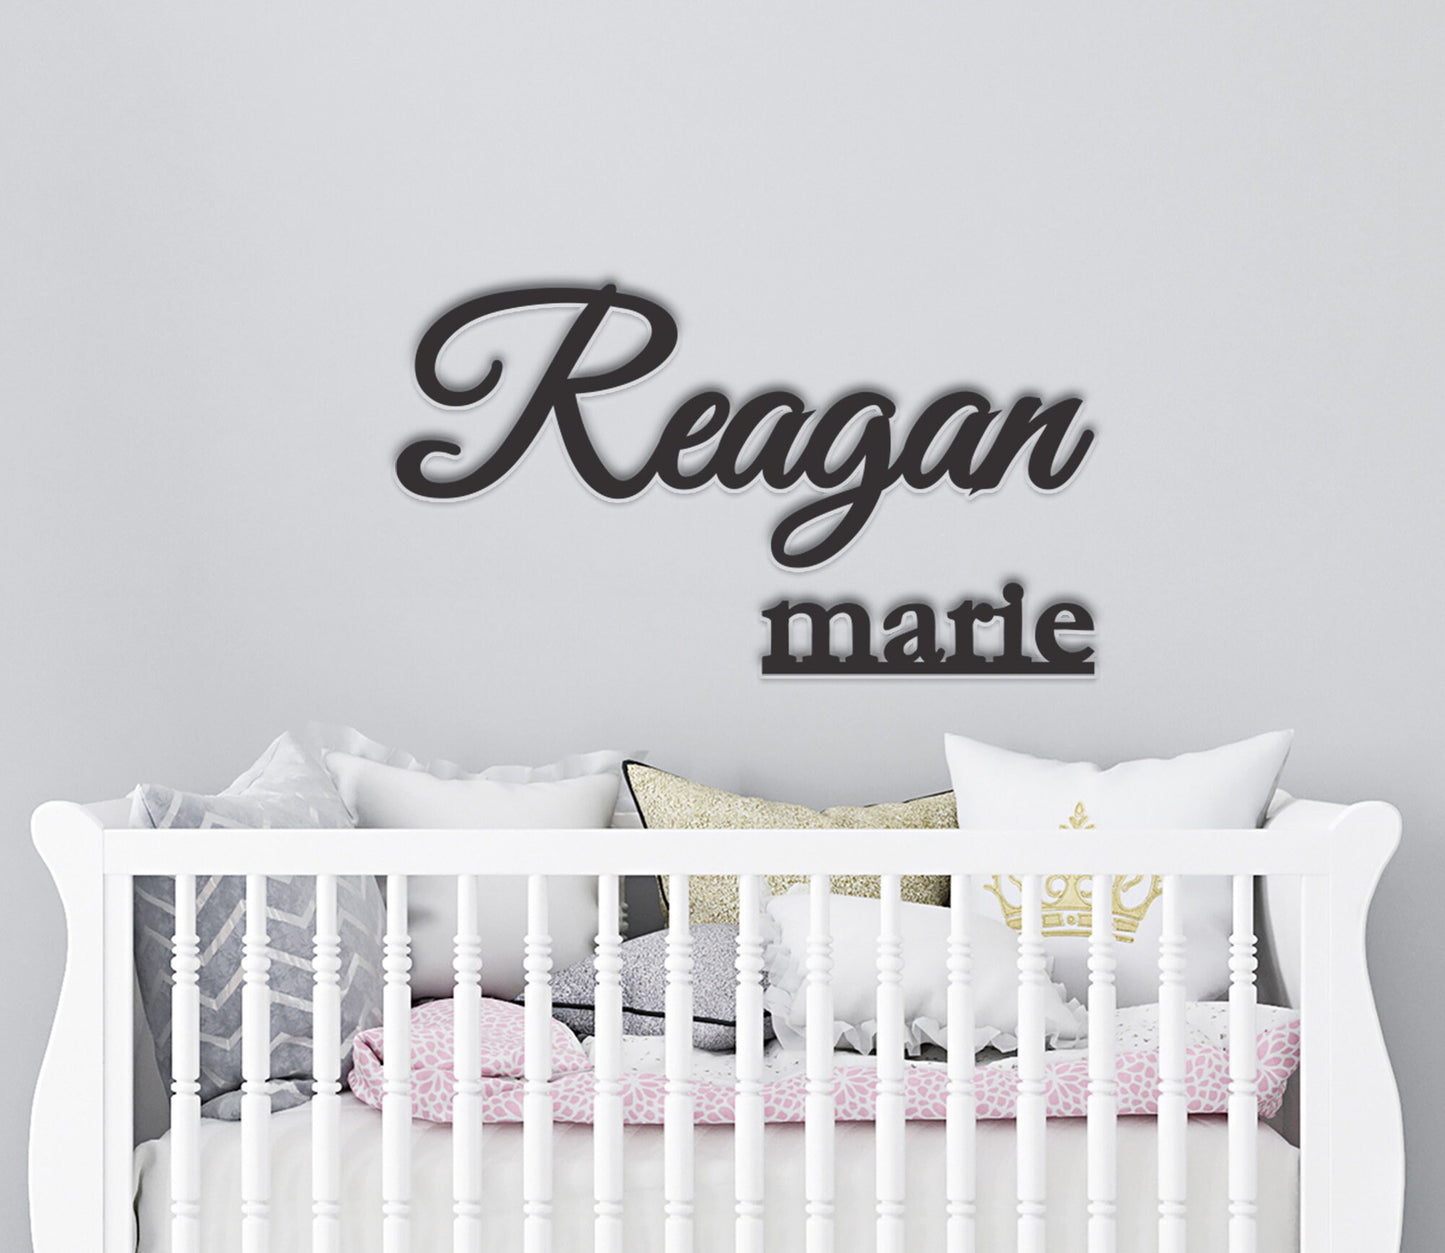 Custom Nursery Name Sign Personalized with First Middle Name, Script Wood Word, Girl Boy Nursery Decor or Event Backdrop, Baby Shower Gift